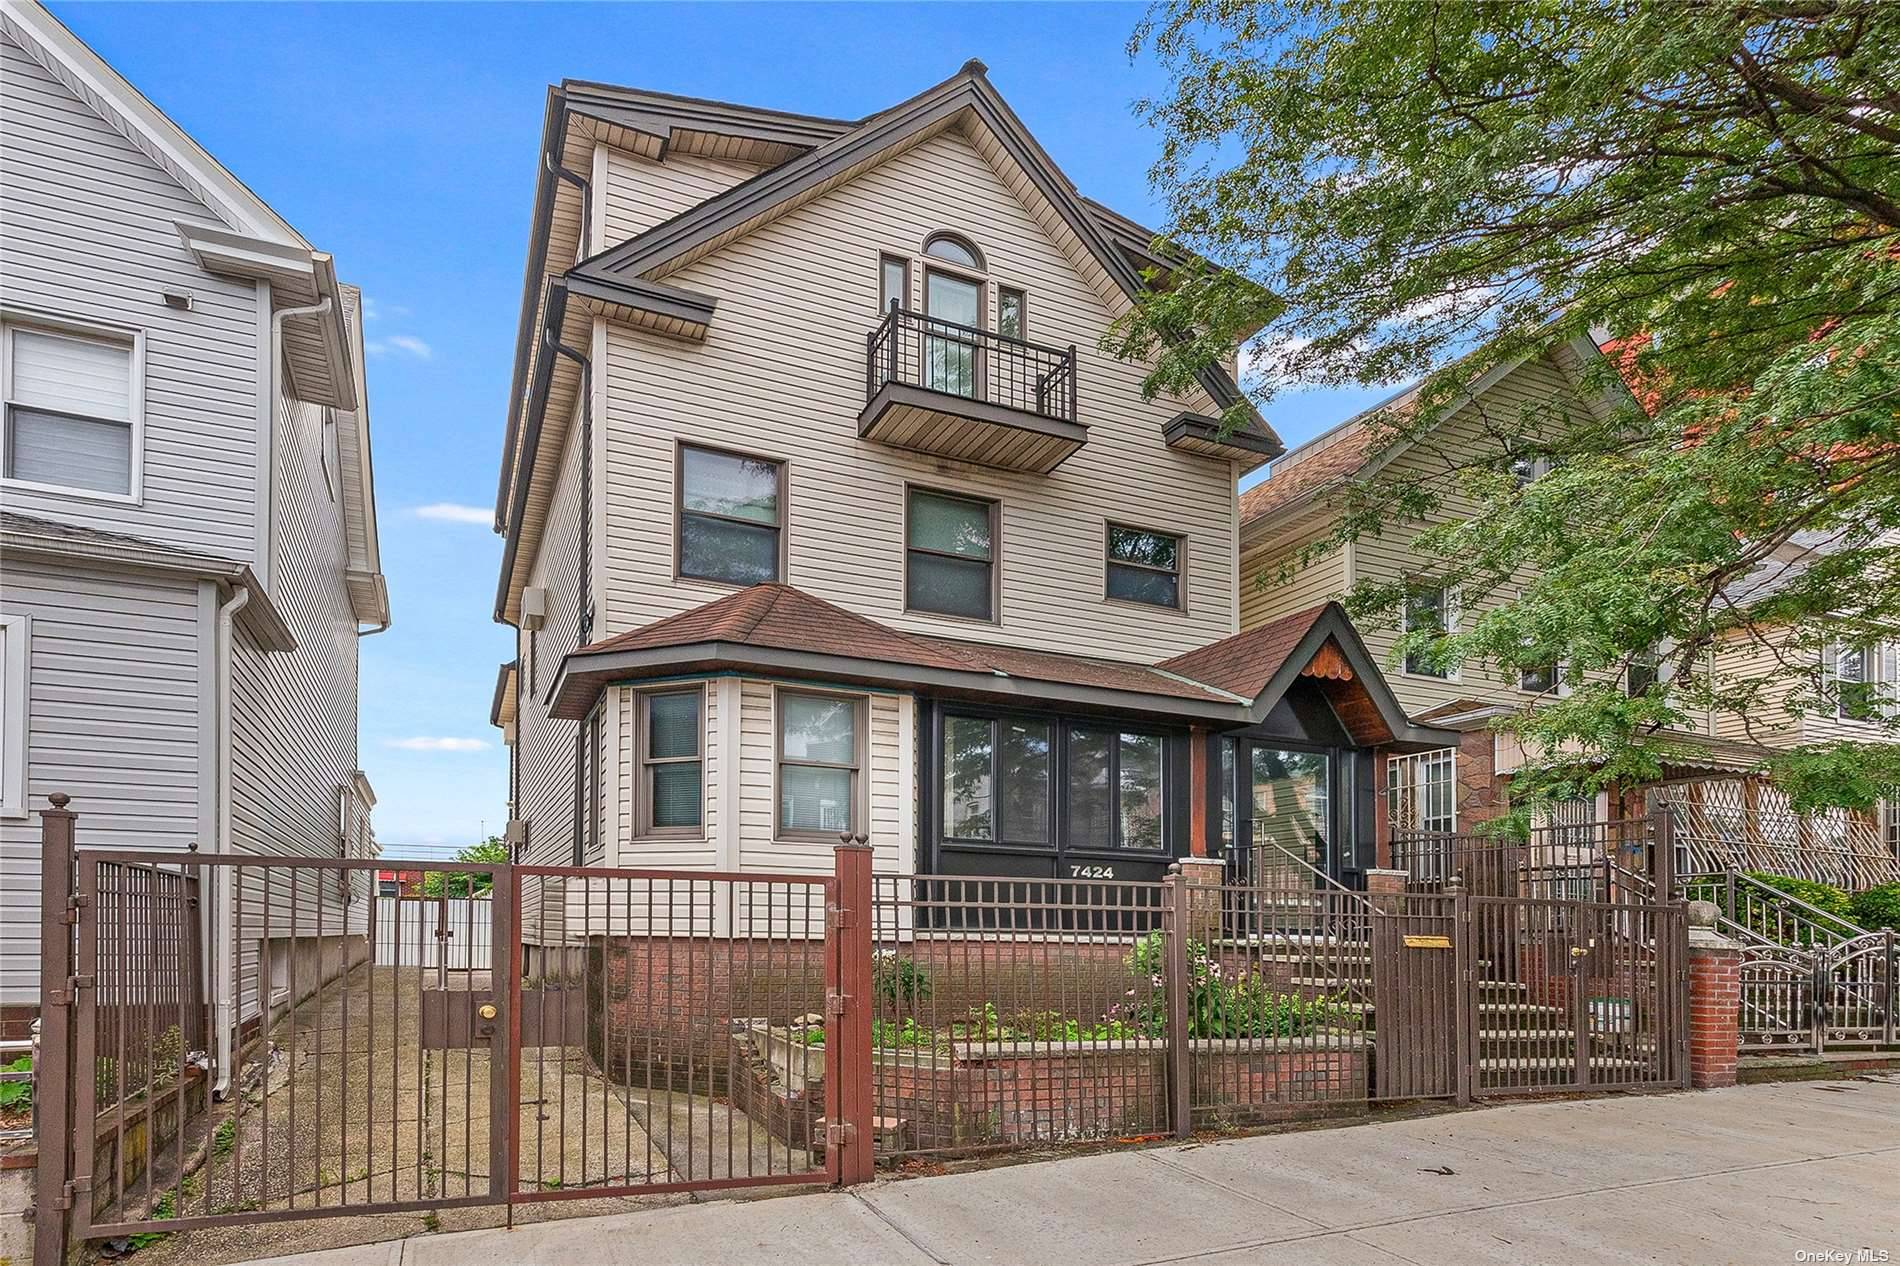 Welcome to this charming one family residence in the heart of Elmhurst, Queens.